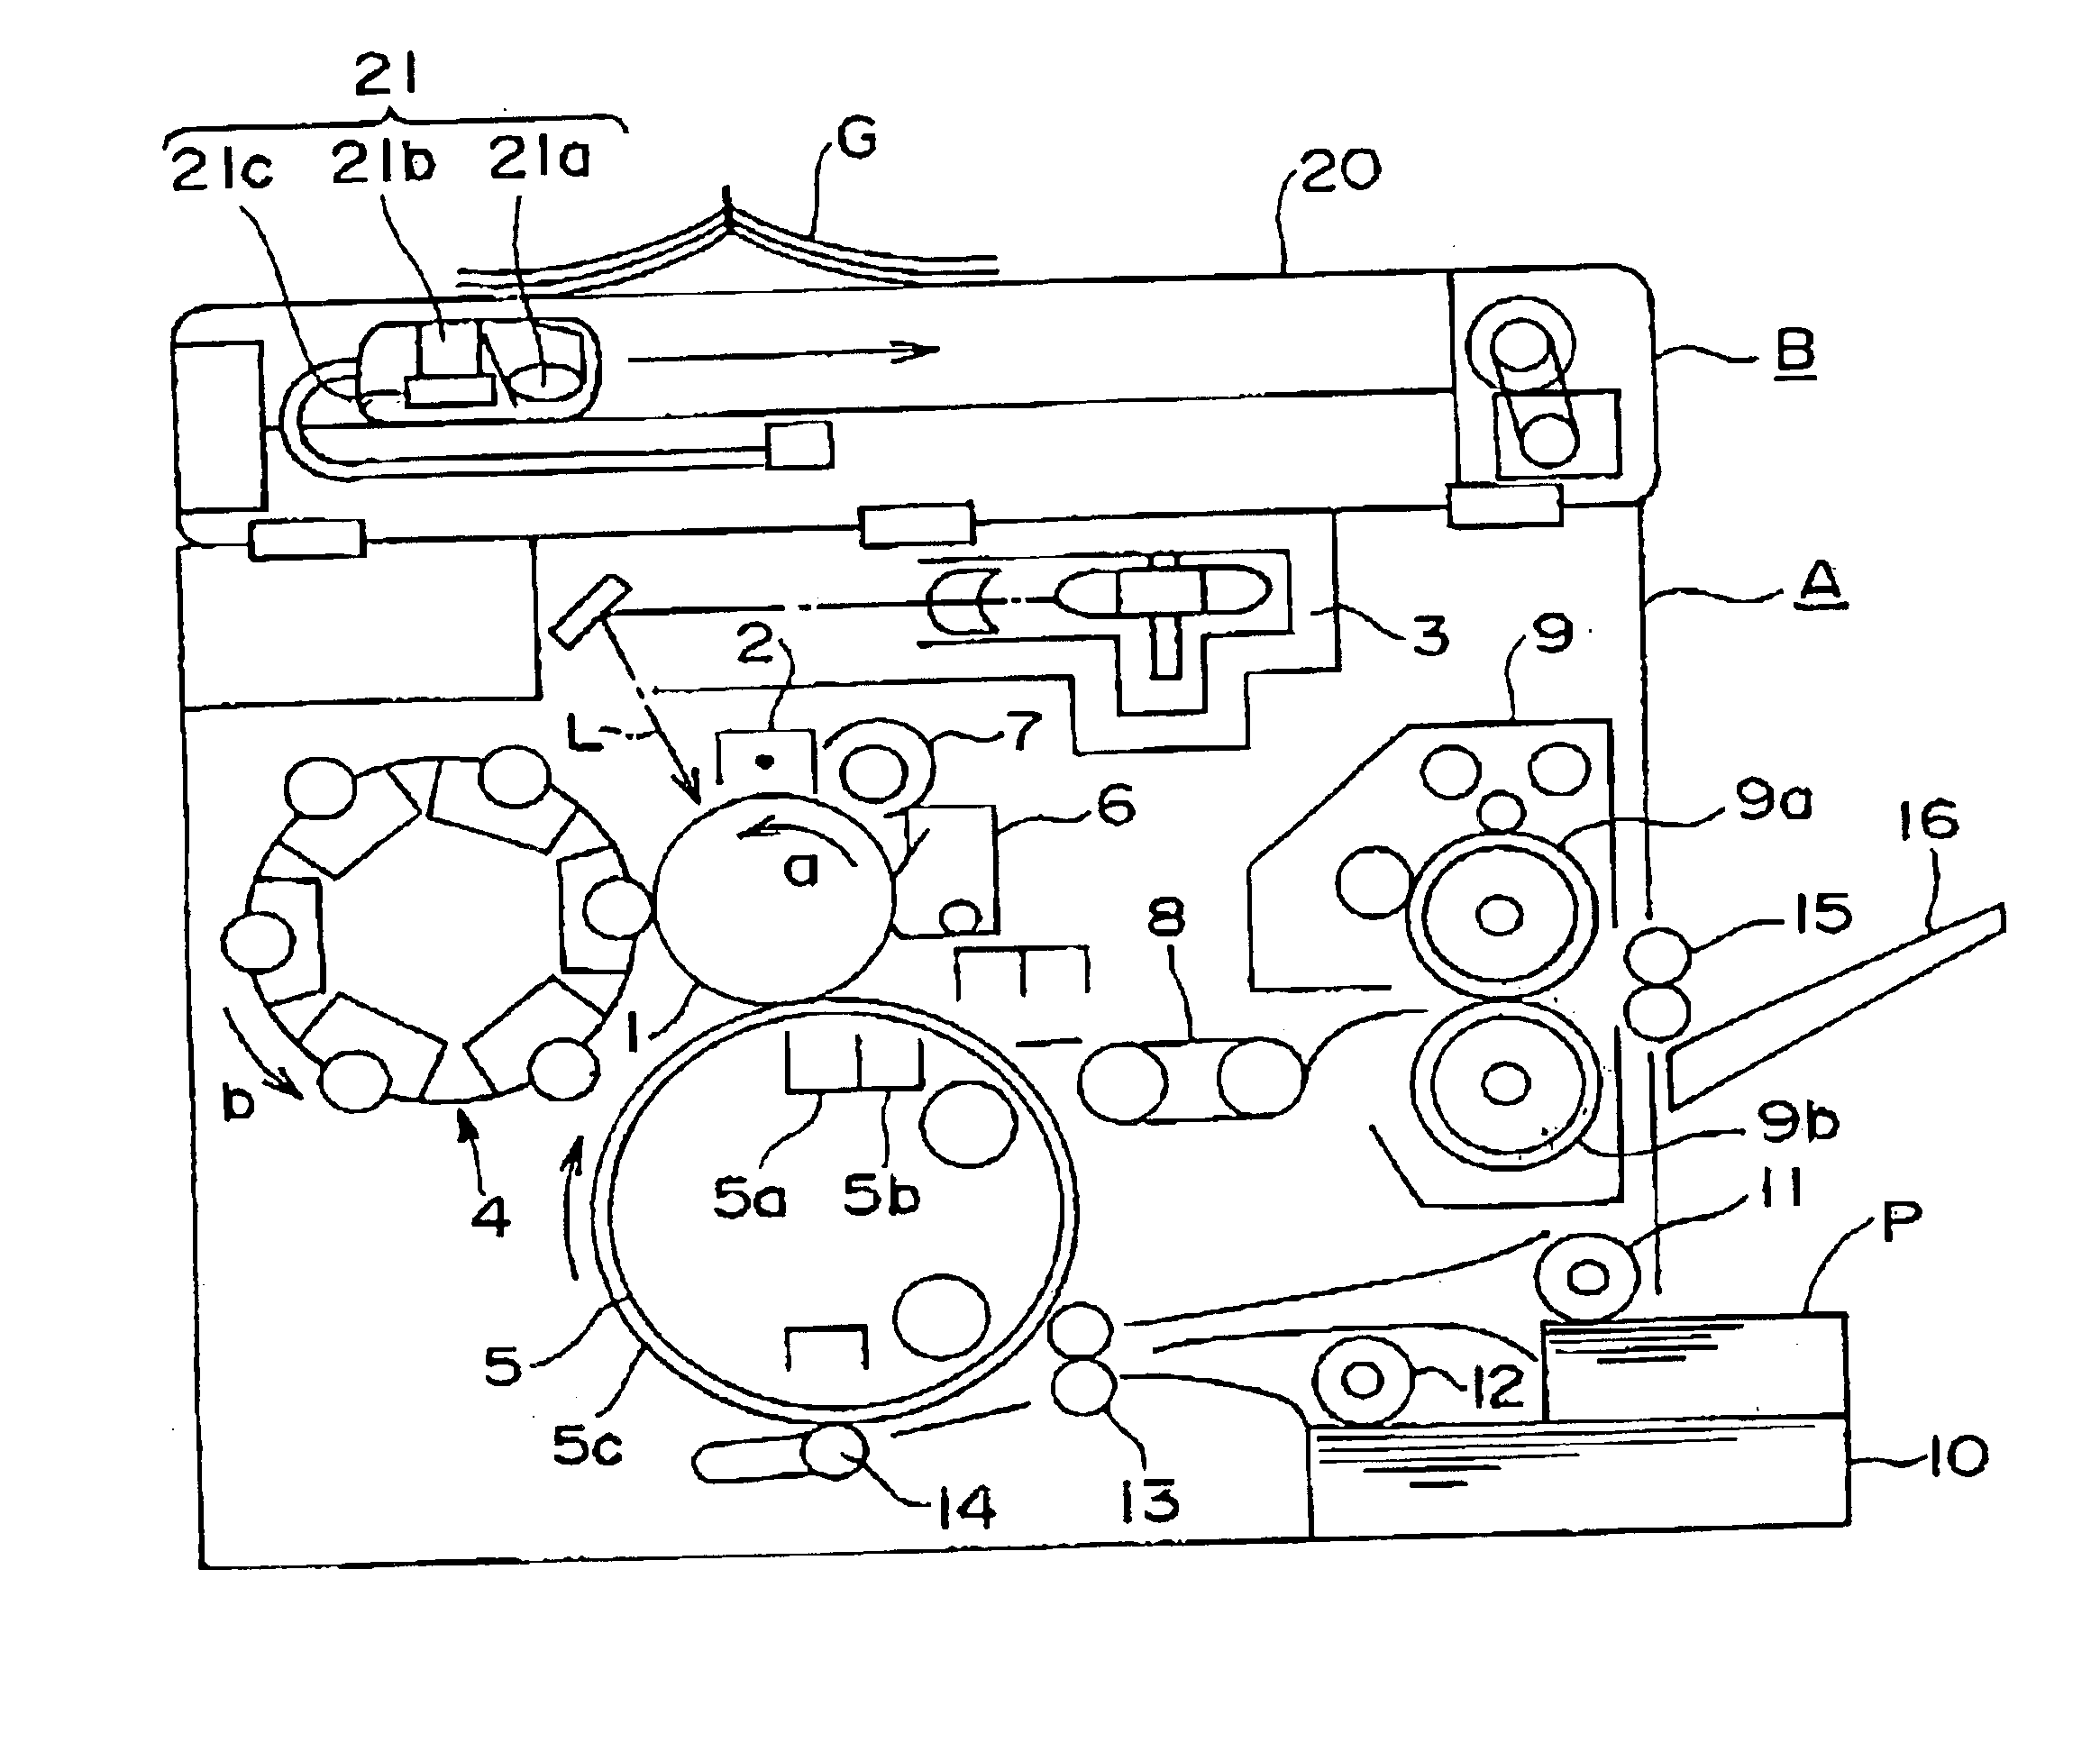 Toner kit, toner, method for forming an image, and image forming apparatus